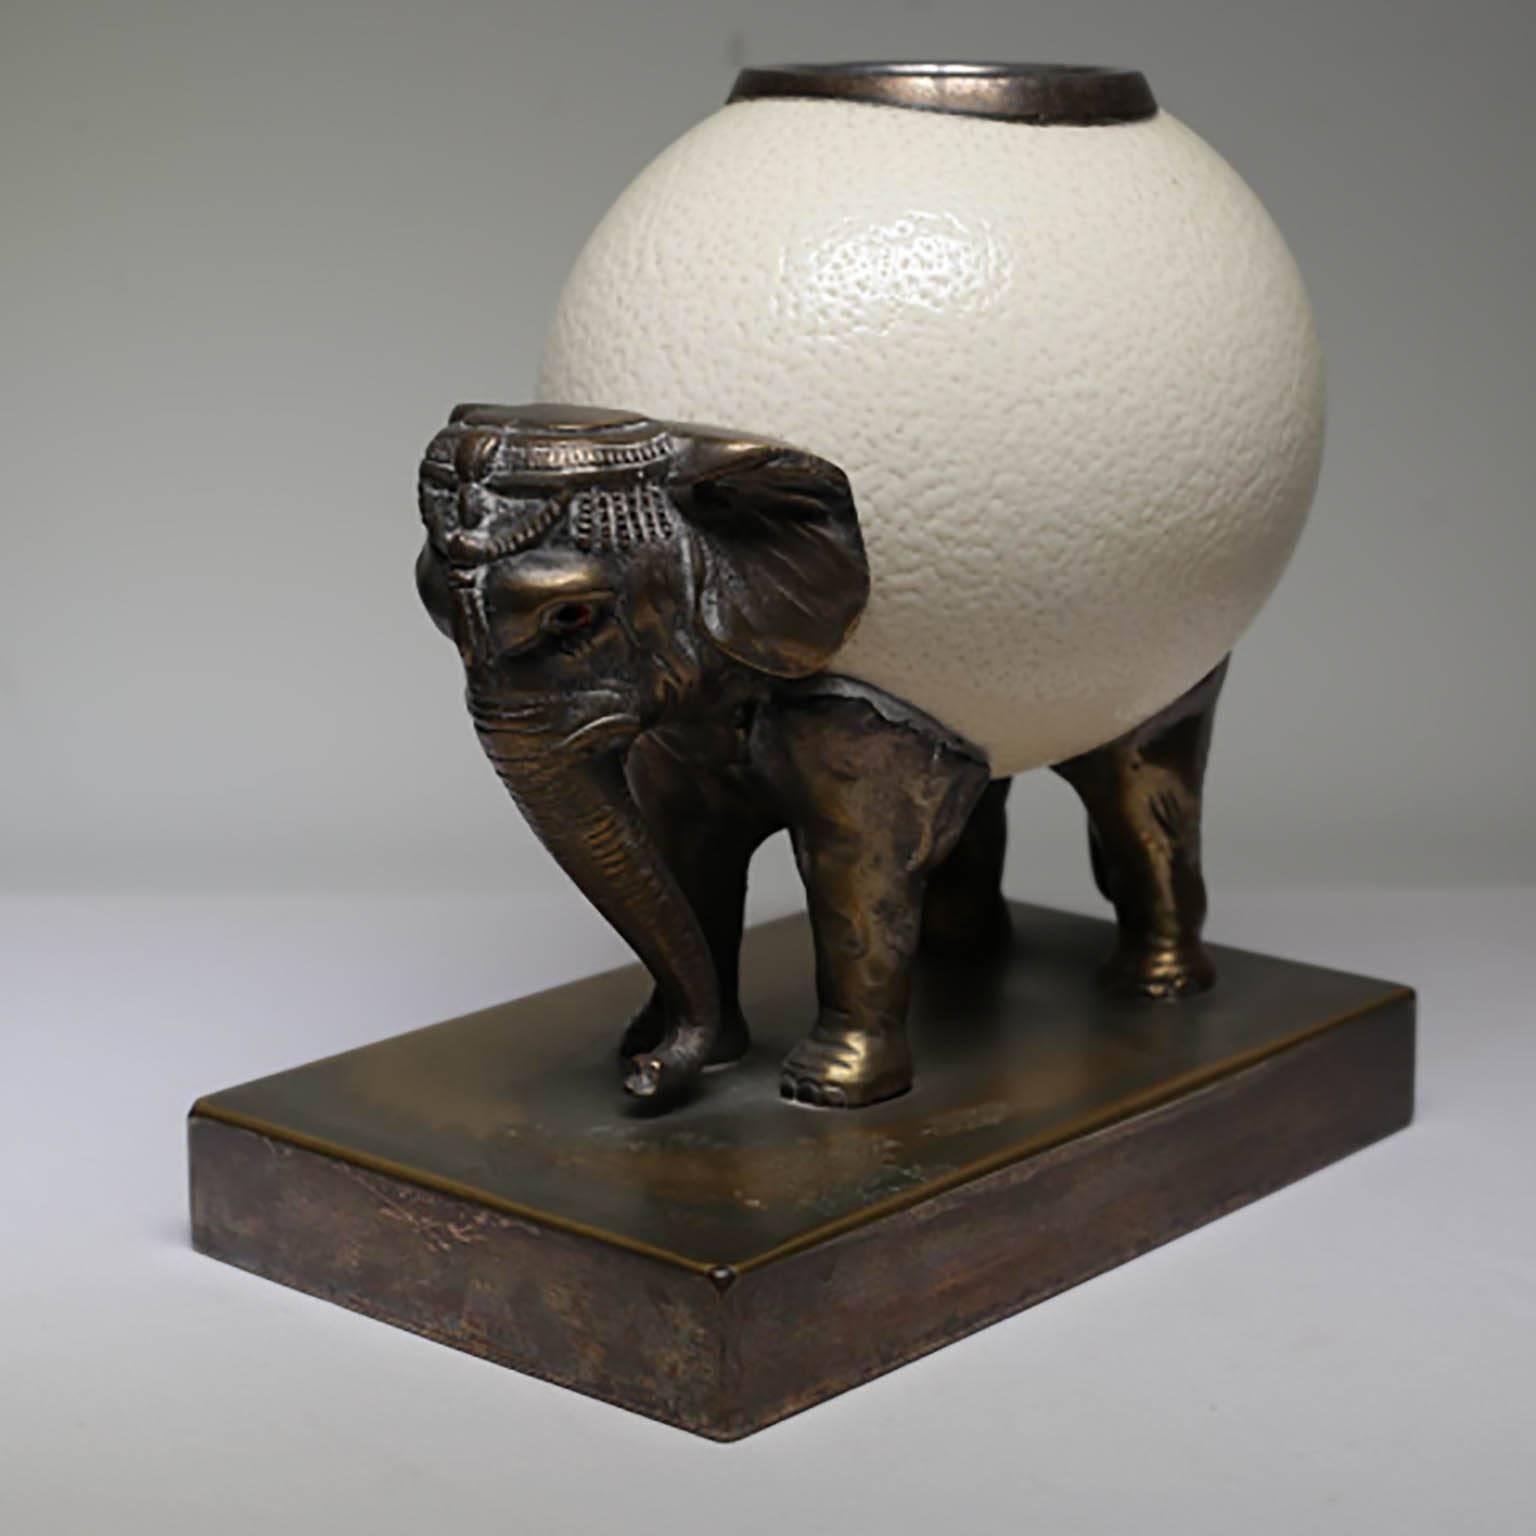 Bronze elephant and ostrich egg sculpture by Anthony Redmile, circa 1970s.
A candle, votive, or candy could be placed in the inner 